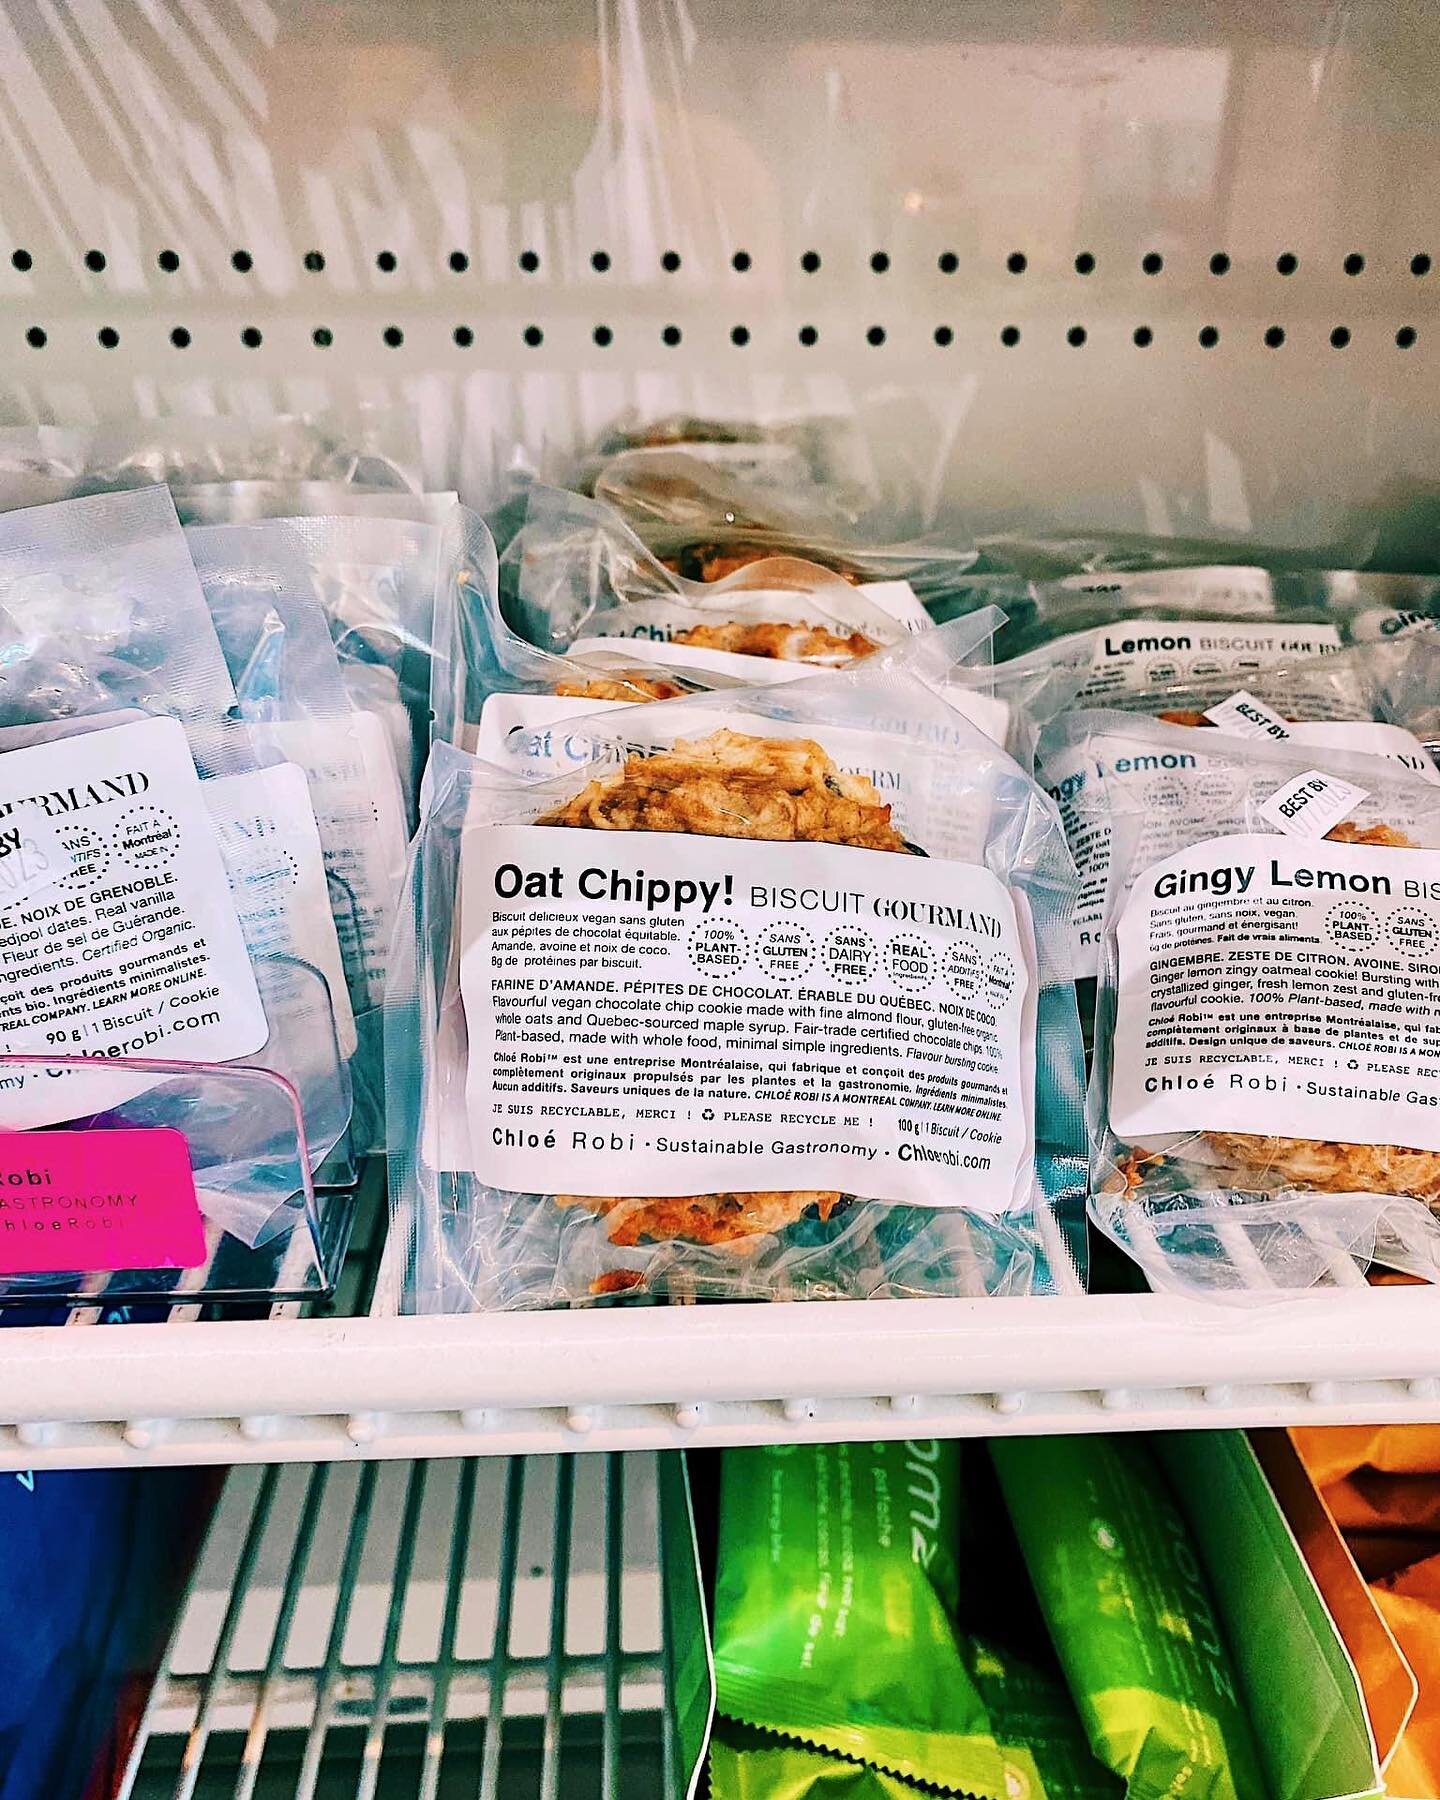 Oat Chippy! #Chloerobi biscuits p&eacute;pites de chocolat gourmands. Ingr&eacute;dients minimalistes, simples et nutritifs.

Oat Chippy! delicious chocolate chip cookie. Minimal ingredients, nutritious and super tasty! 

⭐️ New products: Chloerobi.c